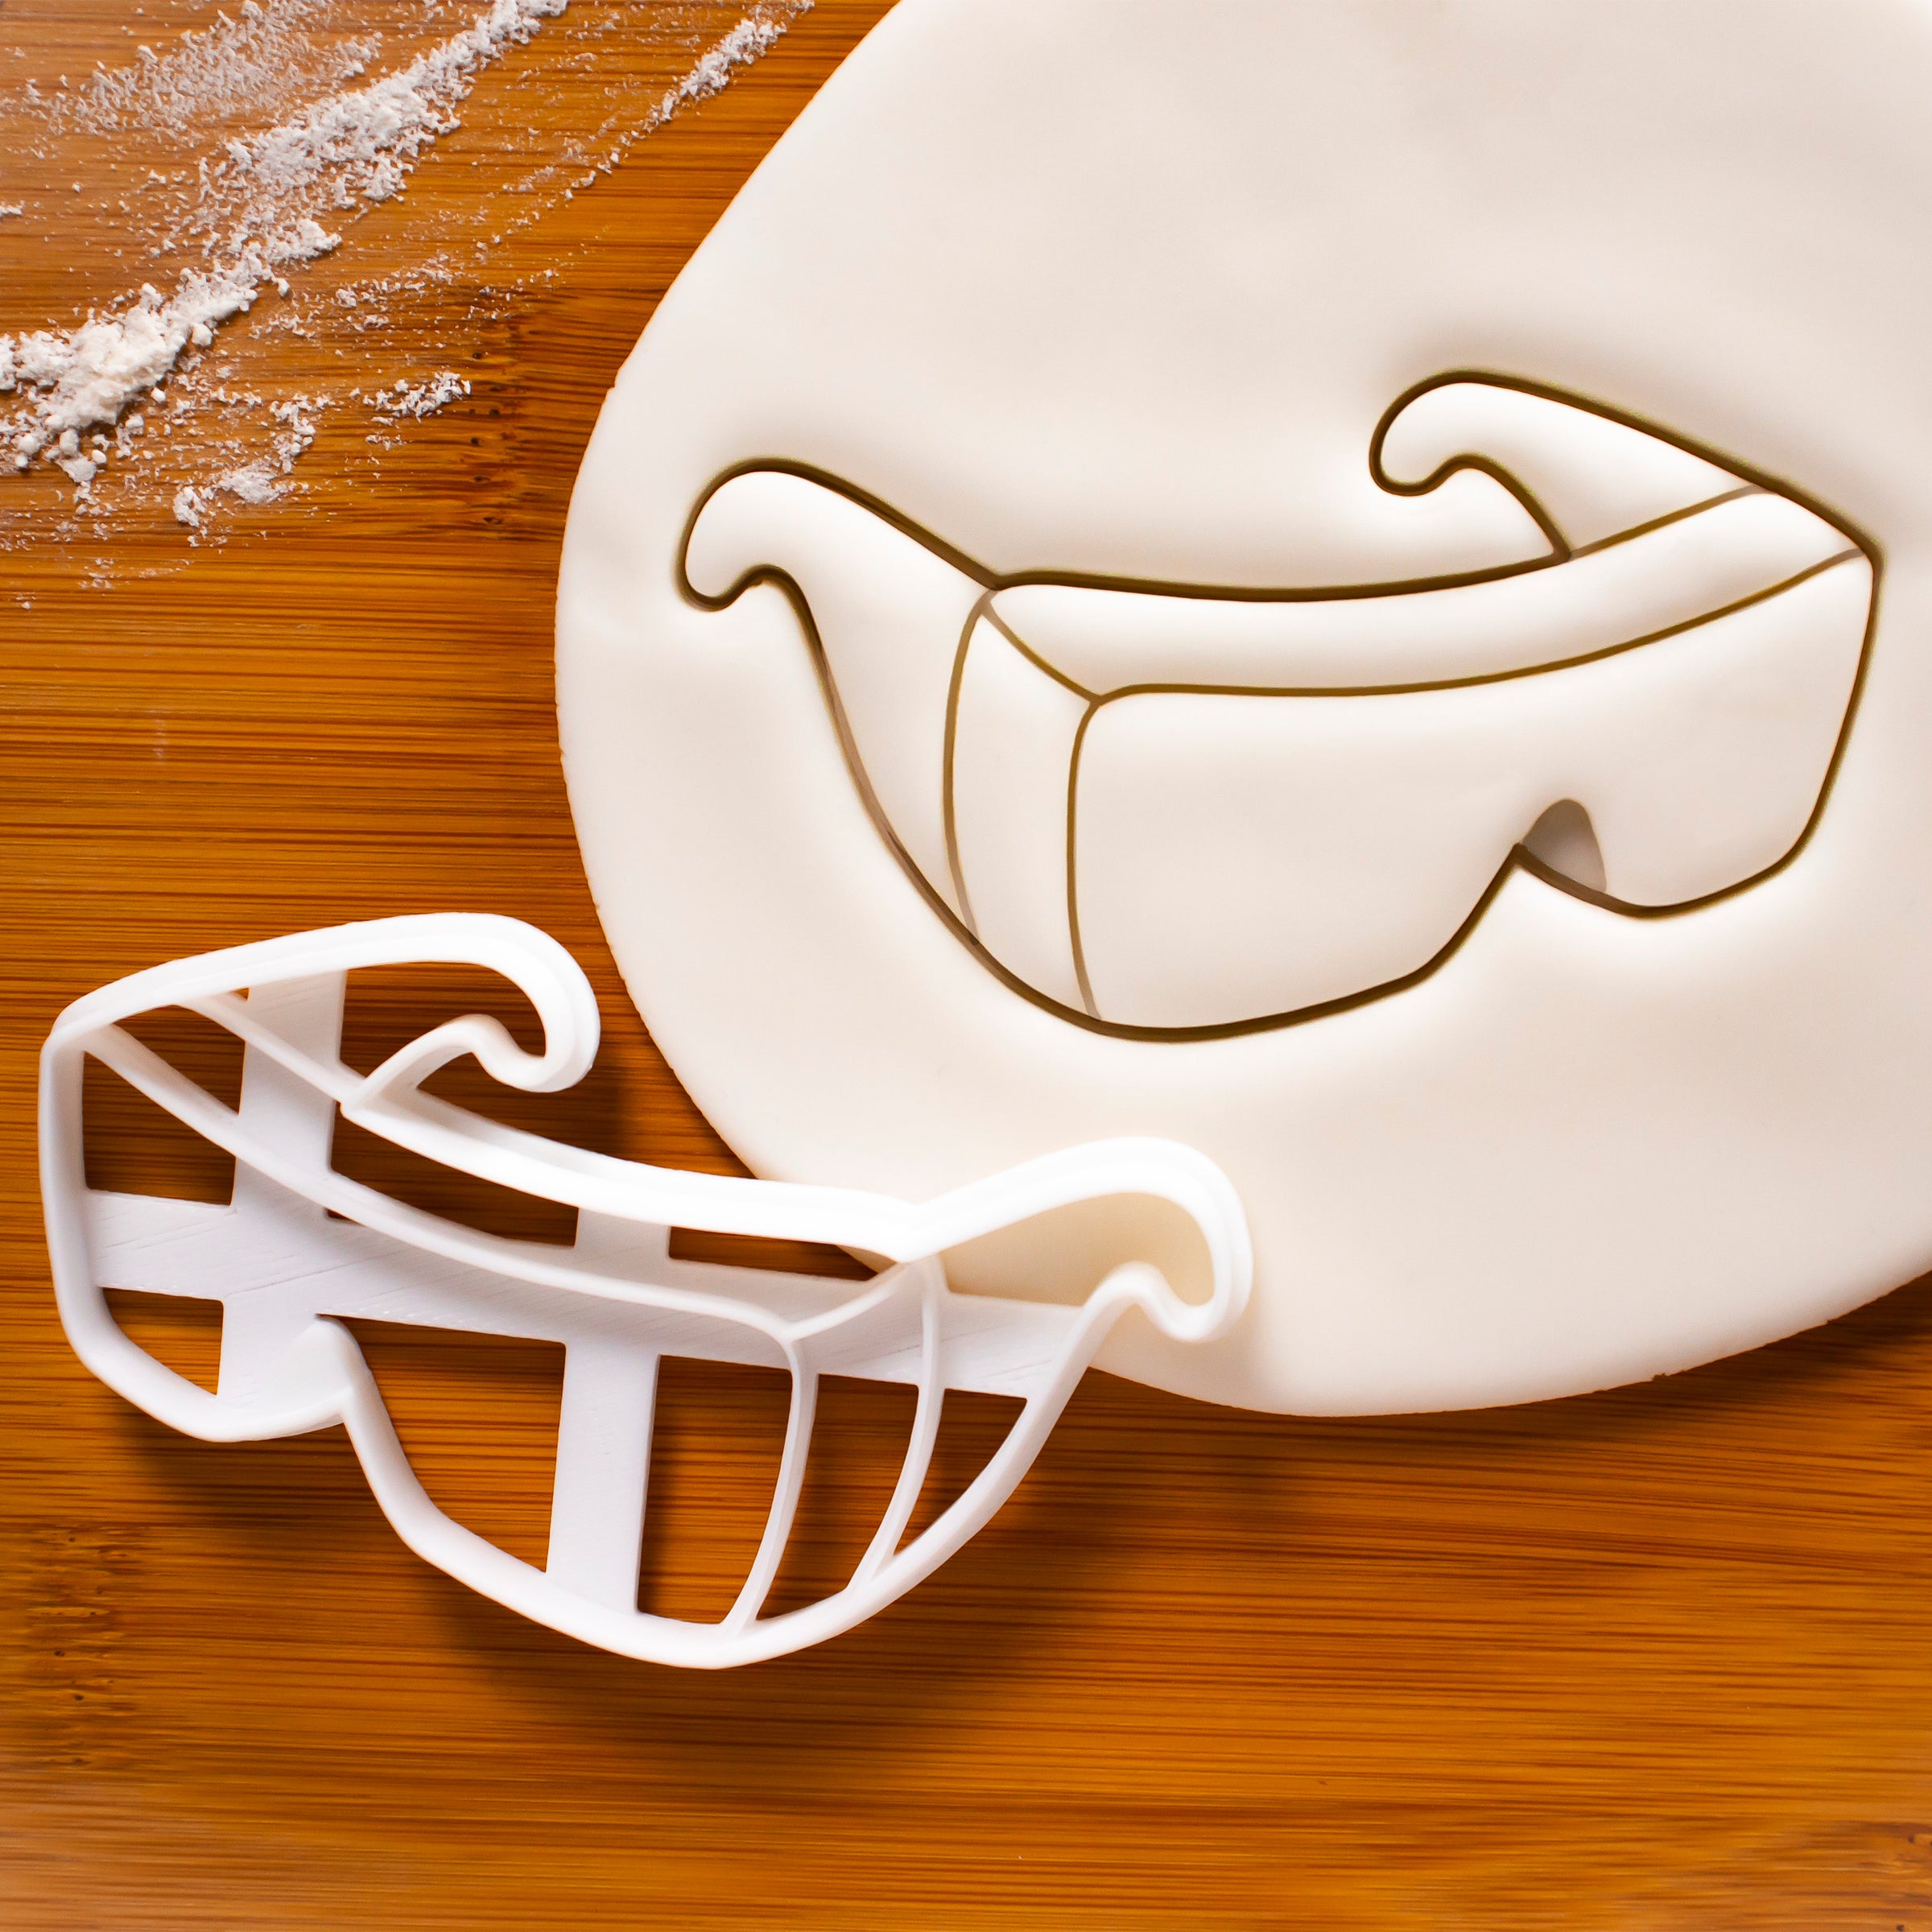 Laboratory Goggles cookie cutter